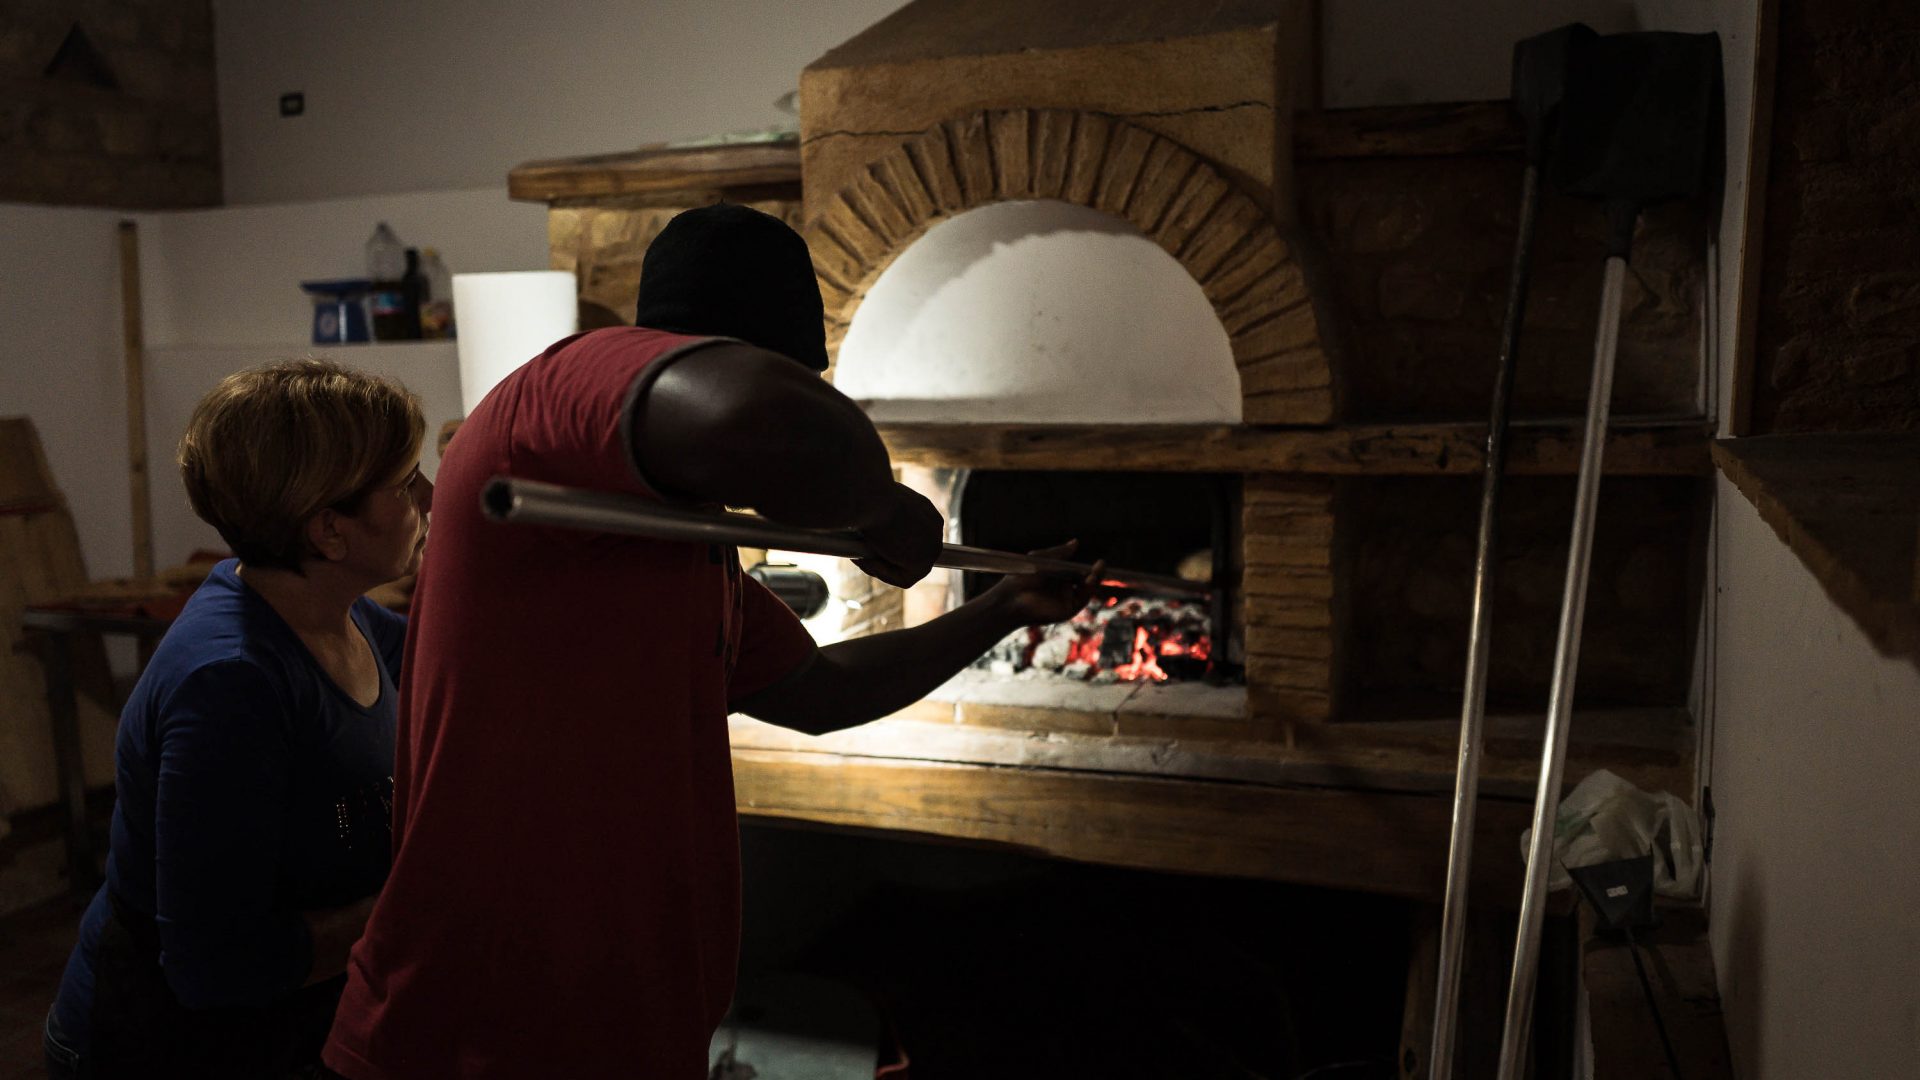 Kolli from Gambia is being taught by Teresa from Camini how to make bread in the oven the traditional way.